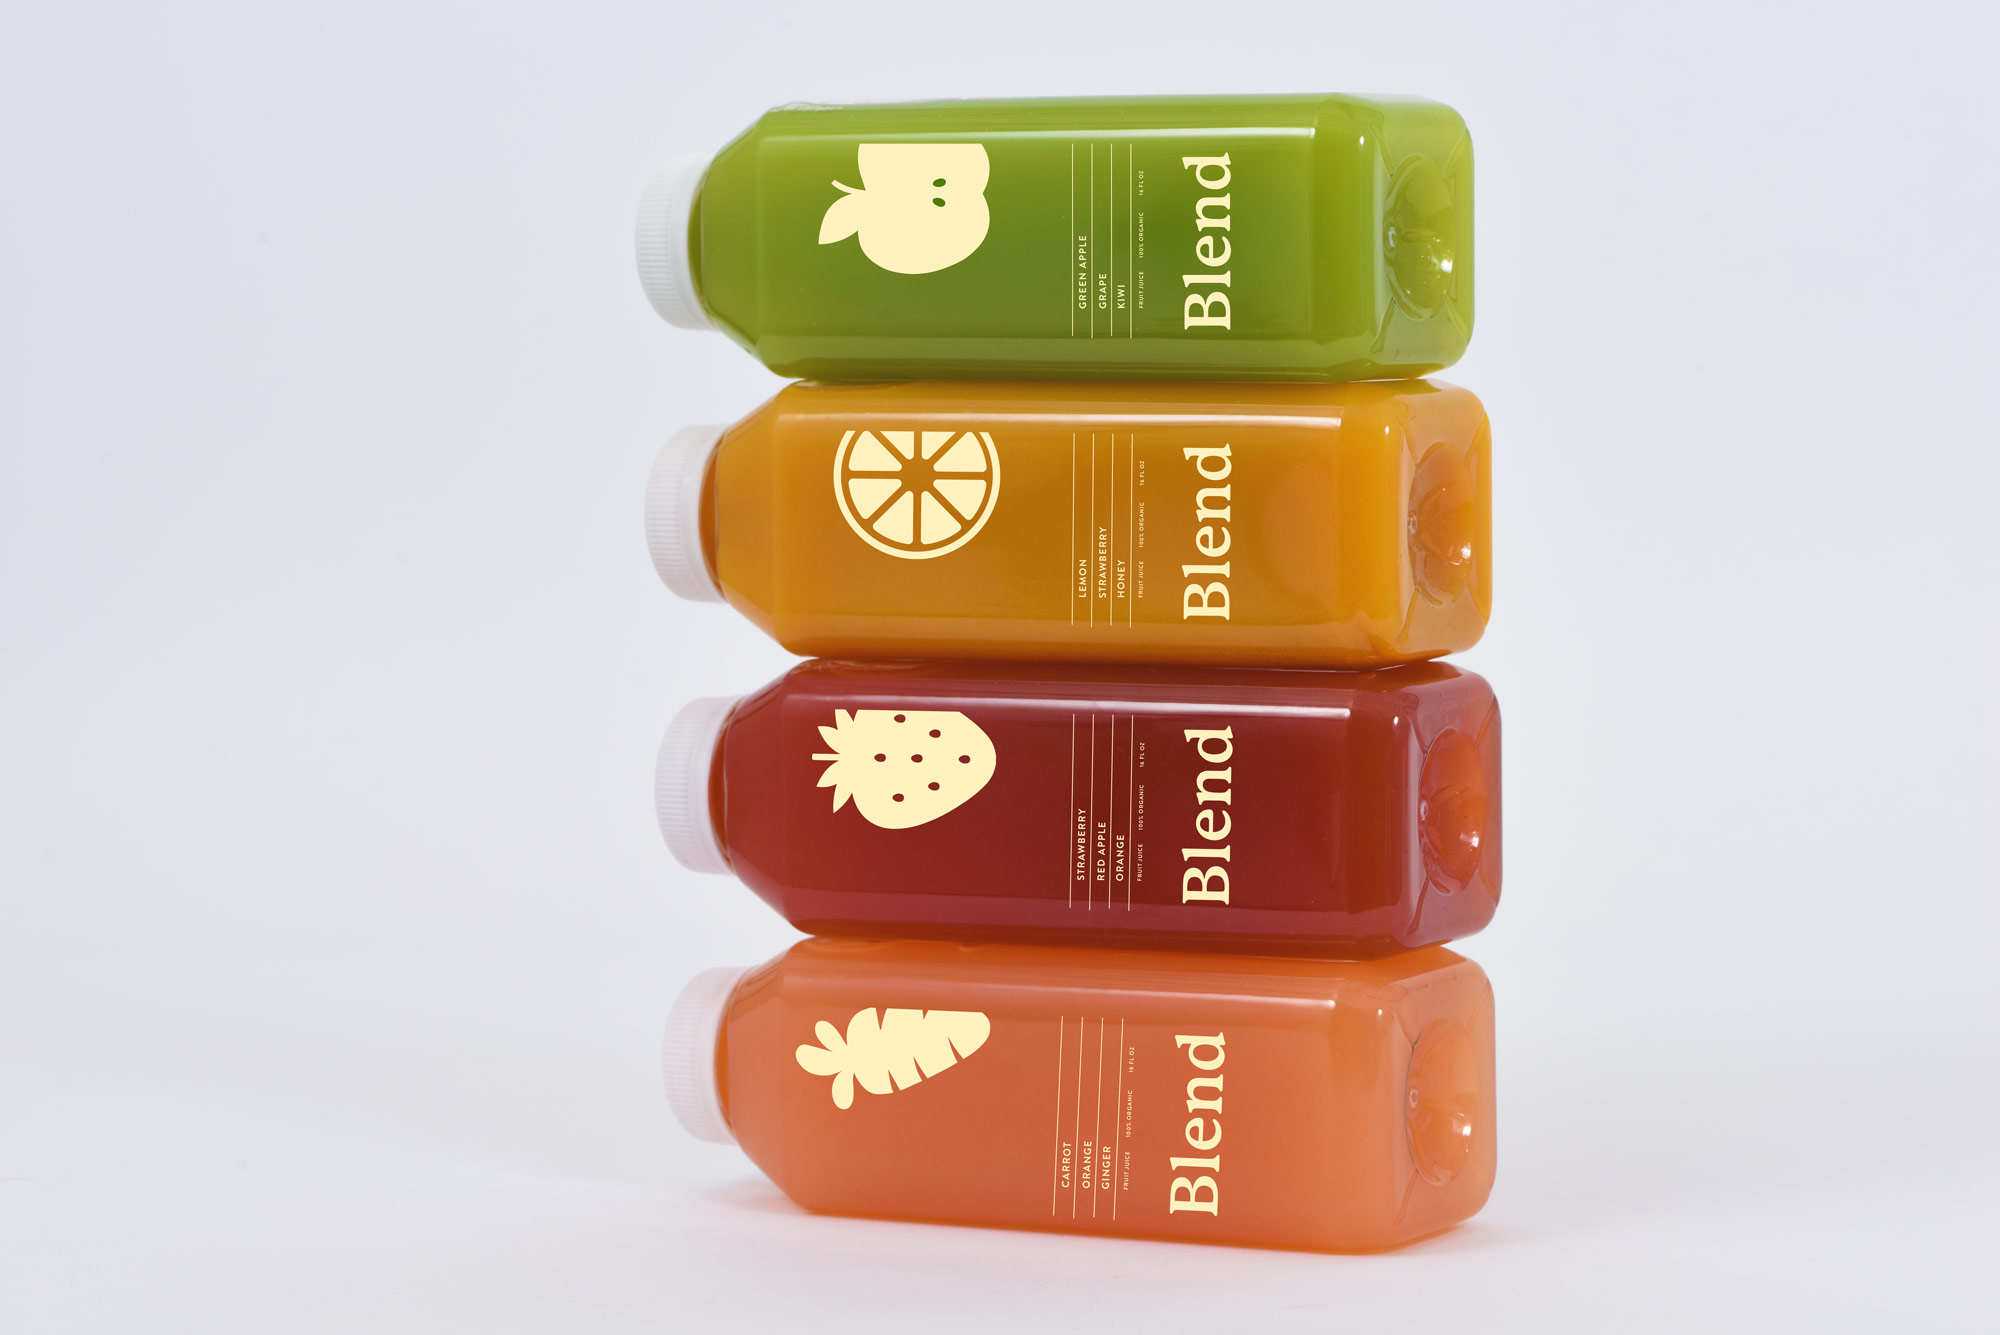 4 branded juice bottles stacked on top of each other.